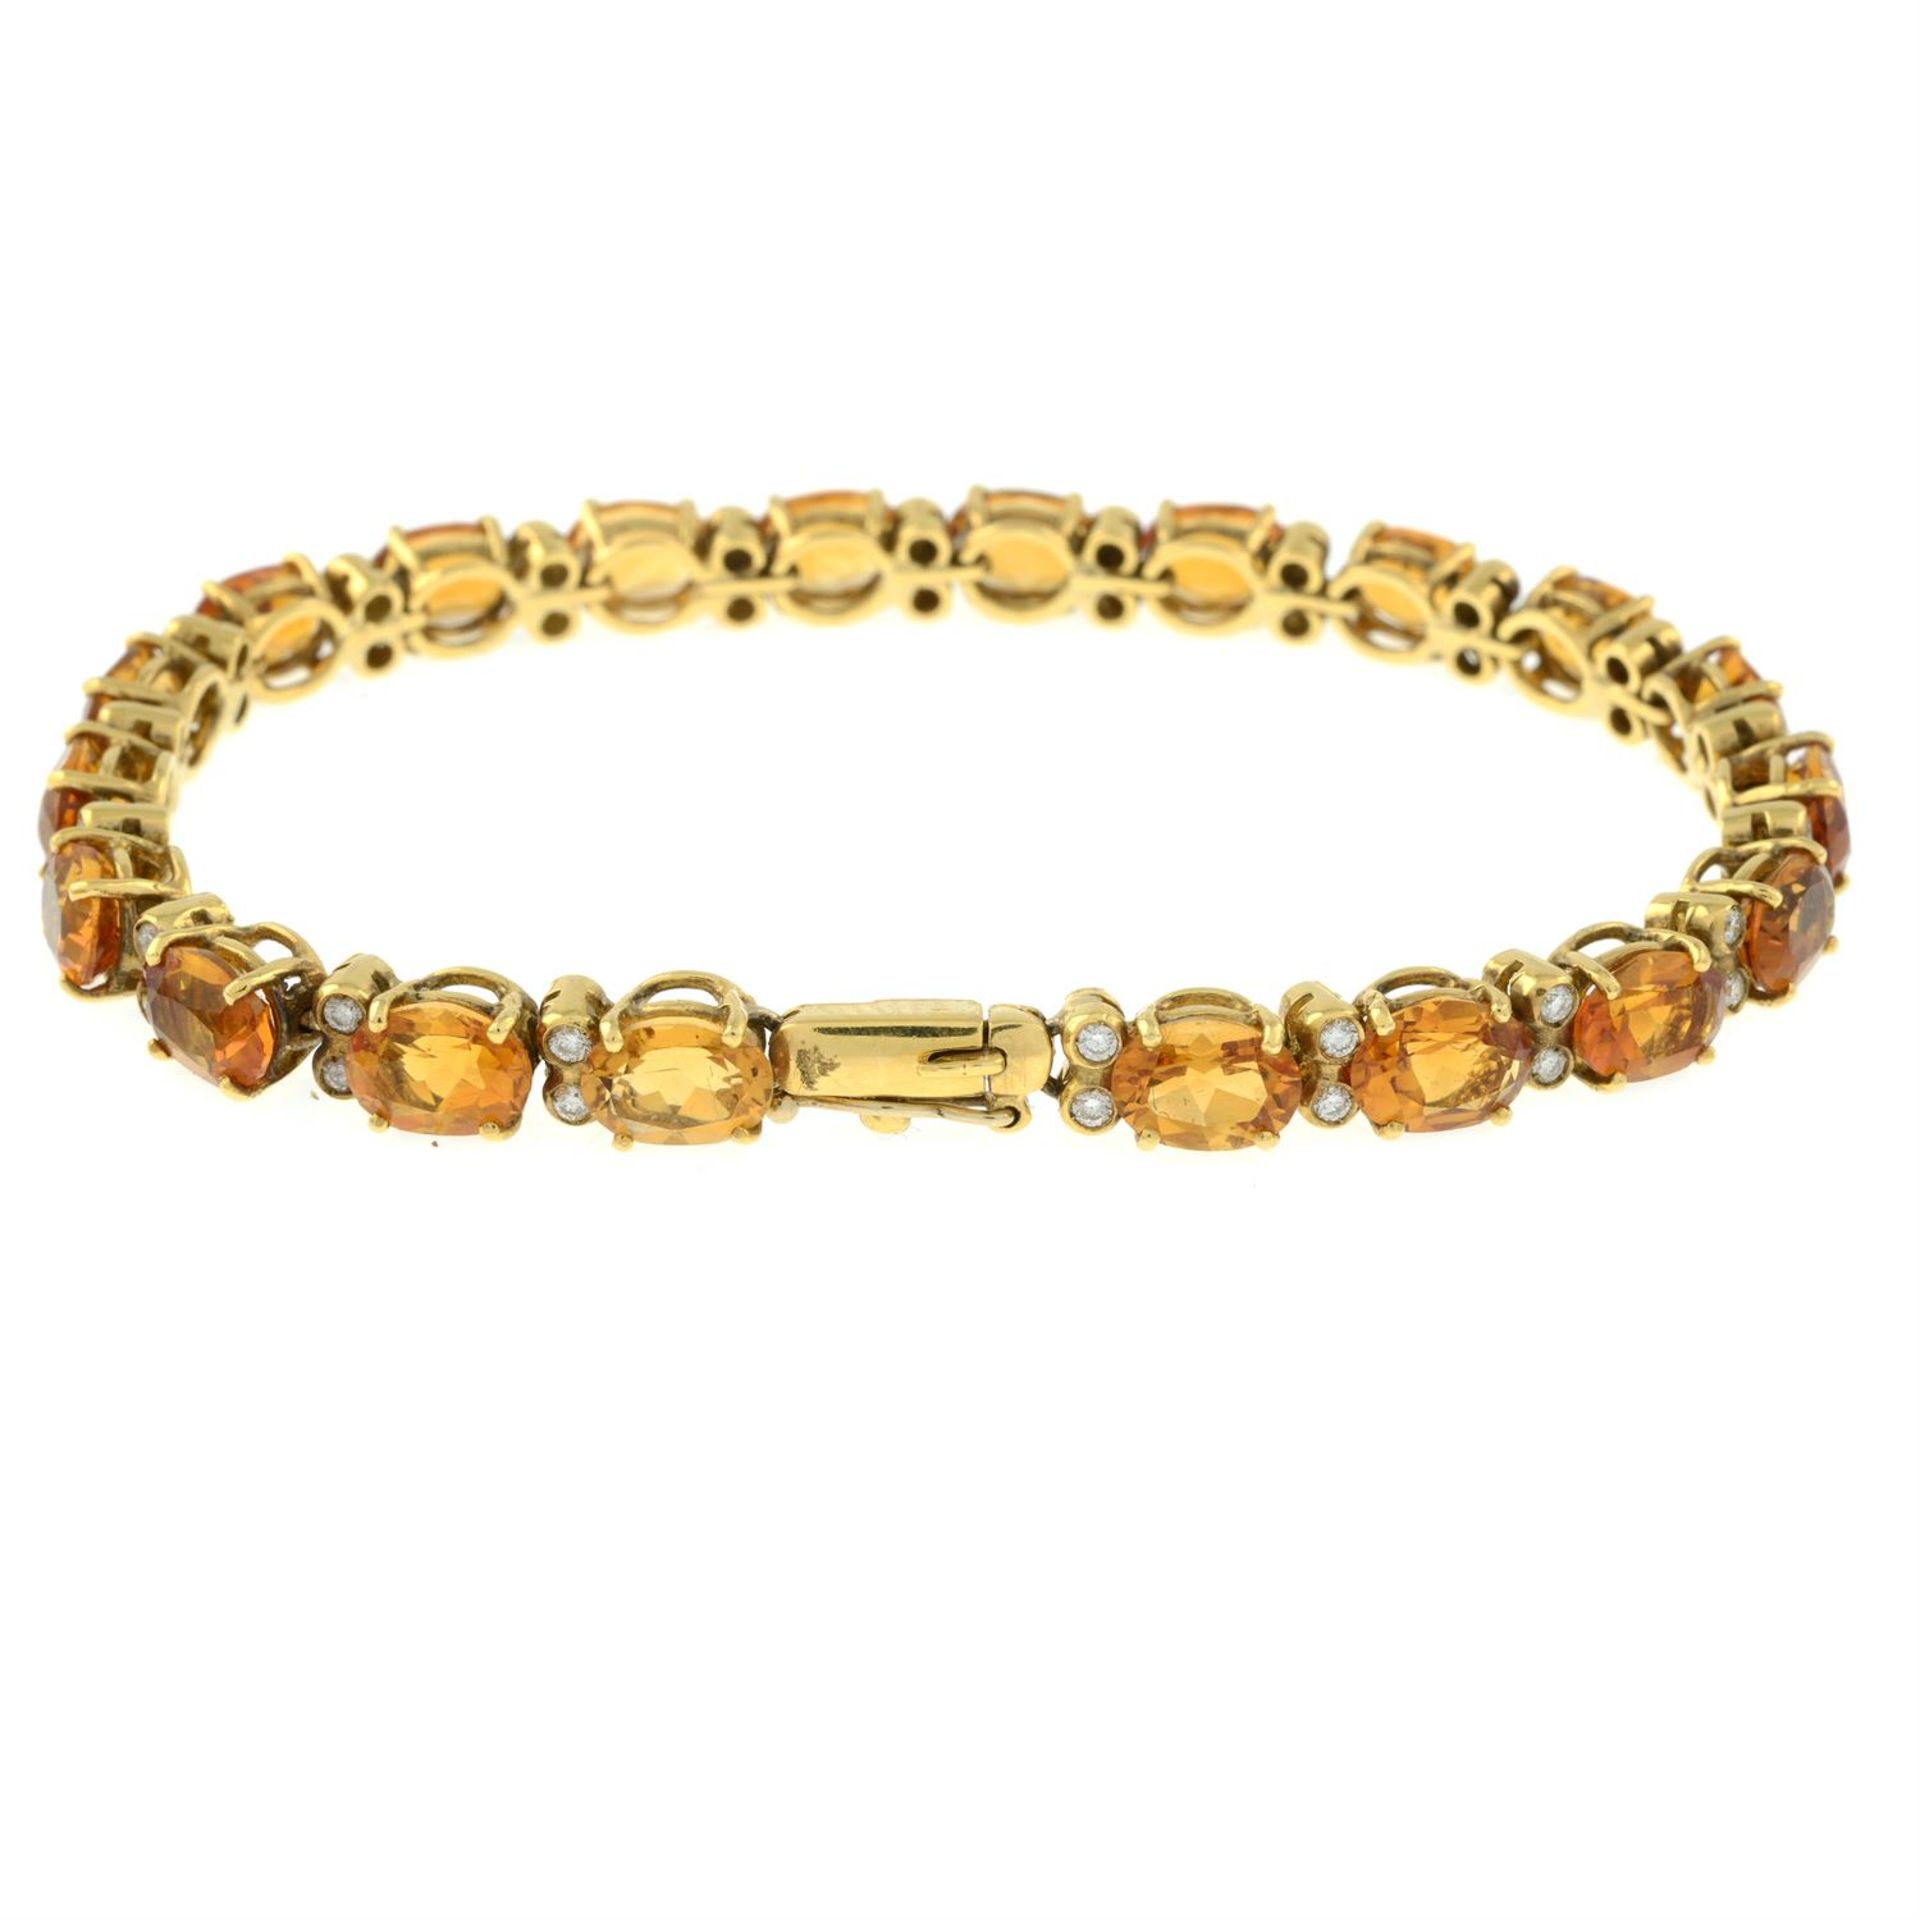 A citrine bracelet, with brilliant-cut diamond spacers. - Image 3 of 3